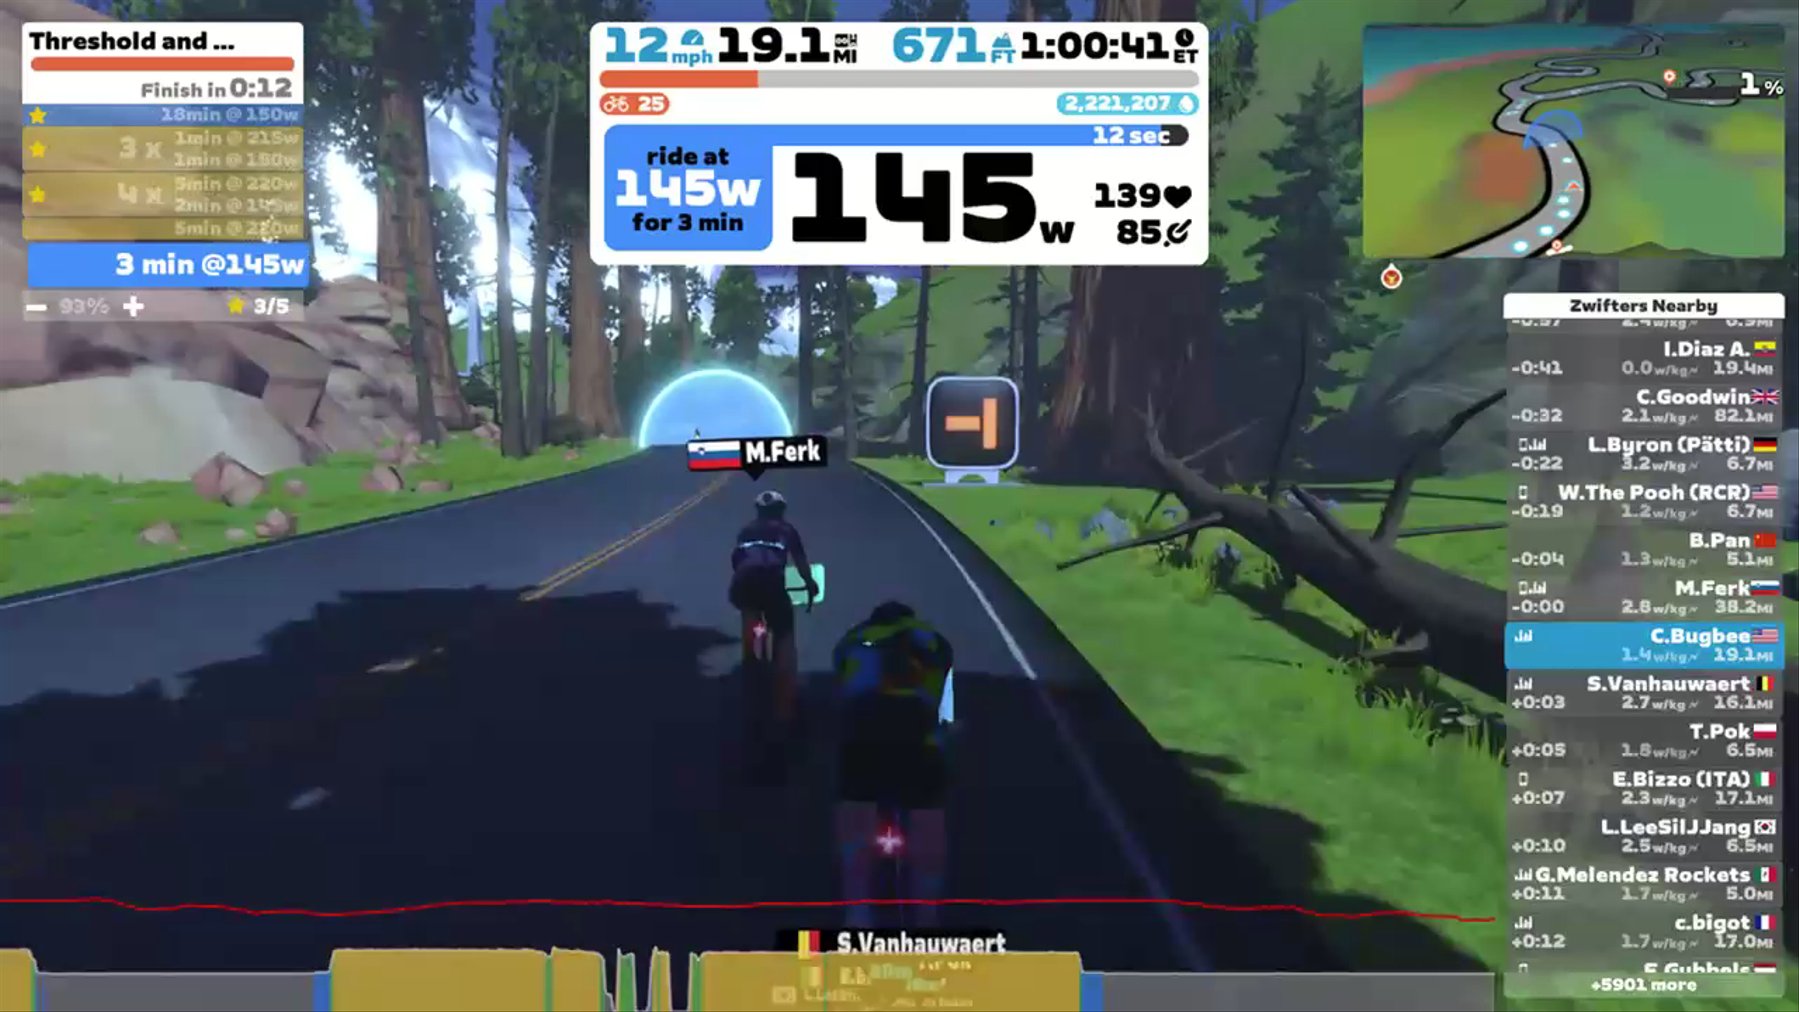 Zwift - Threshold and Intervals in Watopia